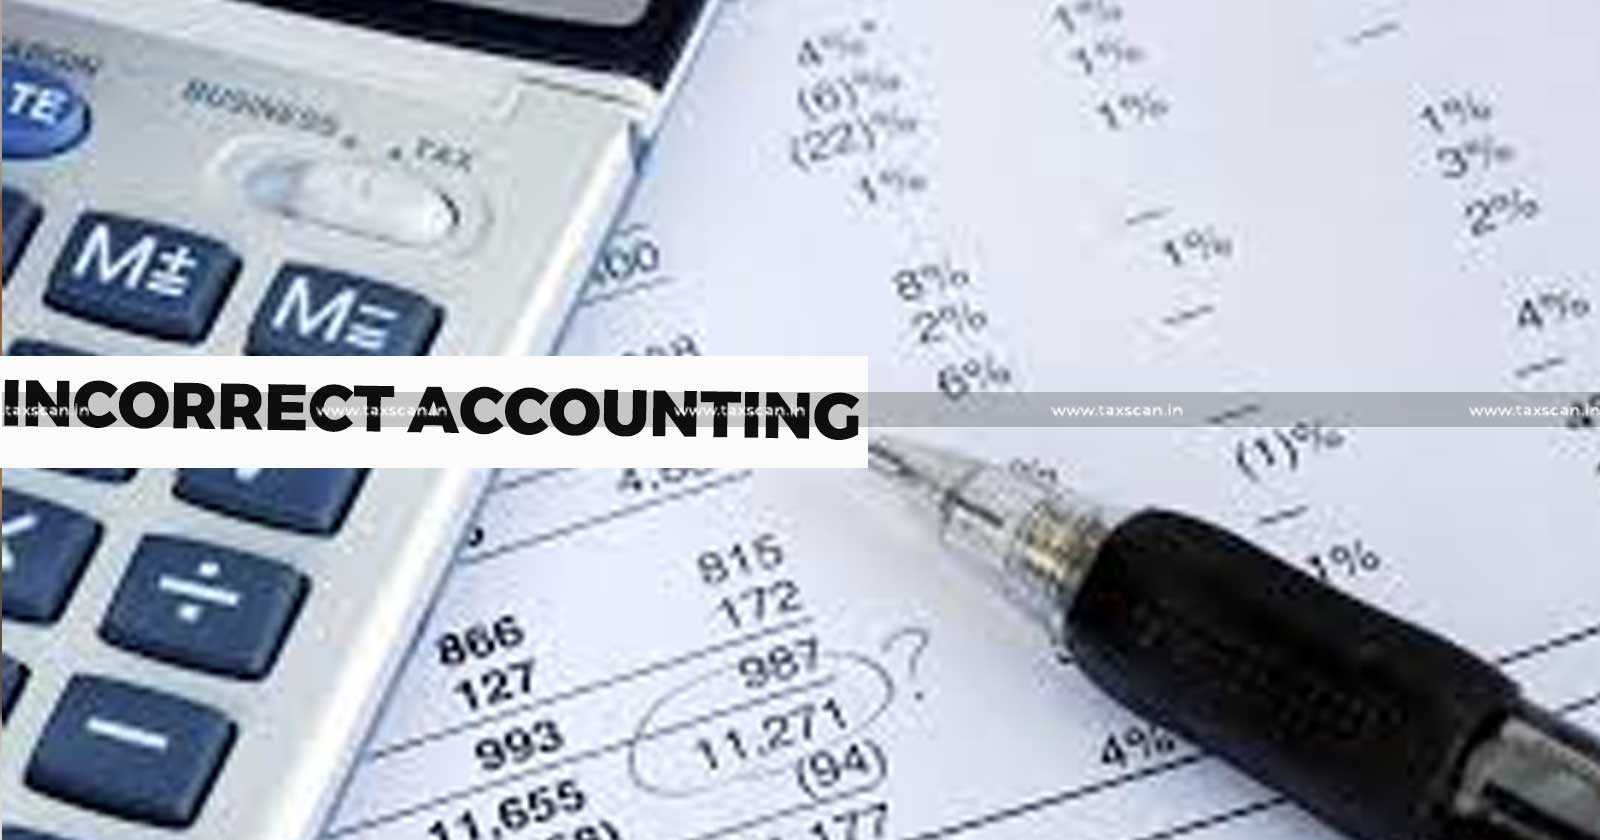 Incorrect Accounting - Wrong Grouping of Headings - Bogus Investment - ITAT grants relief to Assessee - taxscan